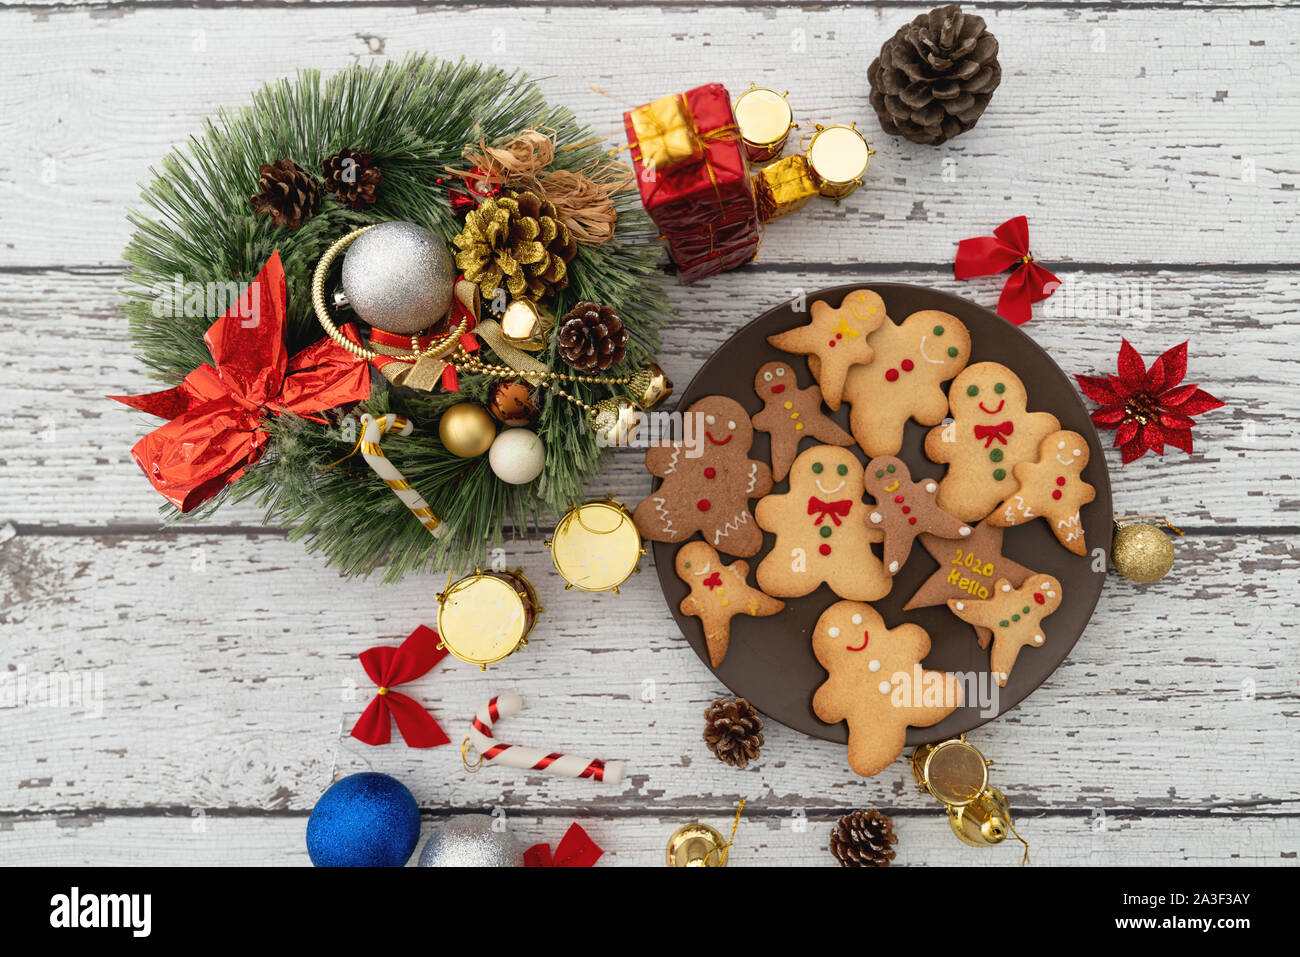 Serving traditional gingerbread cookies with ornaments for christmas celebration. Stock Photo